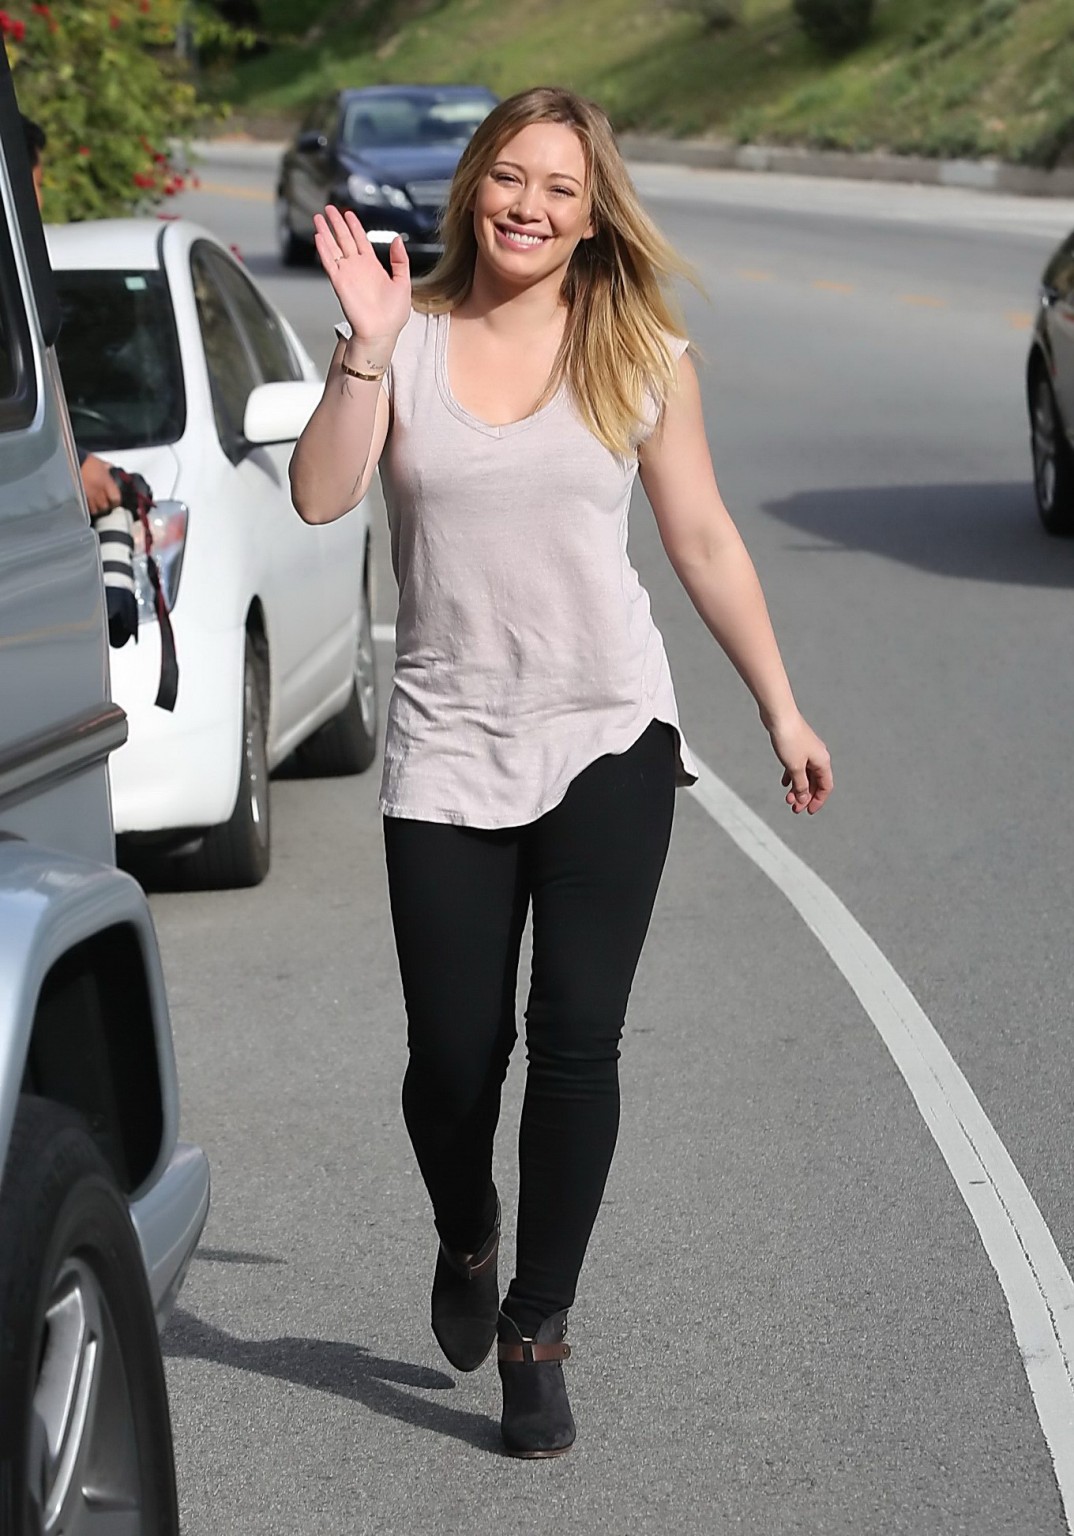 Hilary duff busty booty indossando top e collant fuori in beverly hills
 #75243021